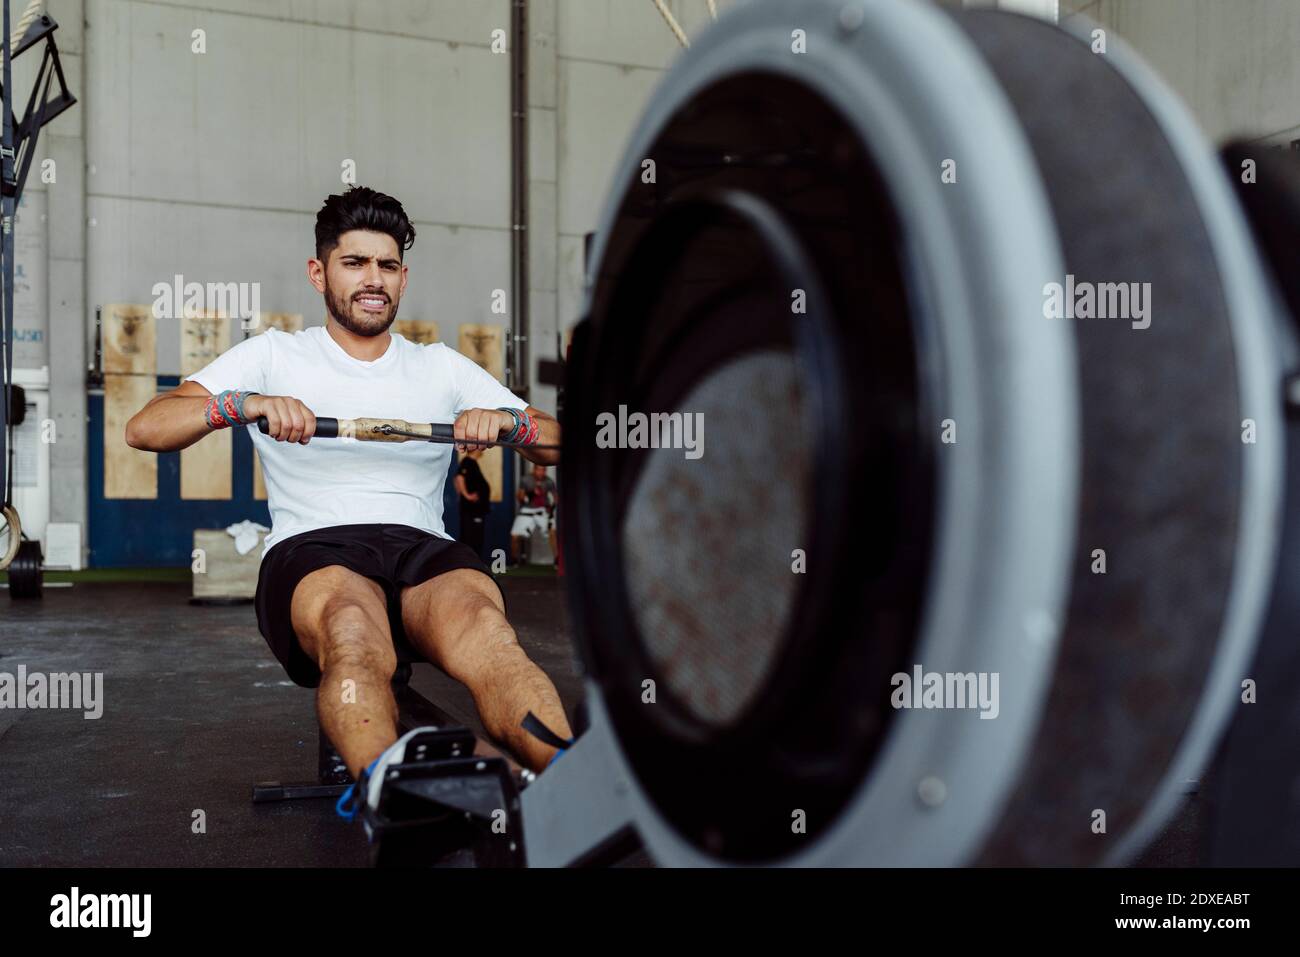 Athlete exercising with rowing machine at gym Stock Photo